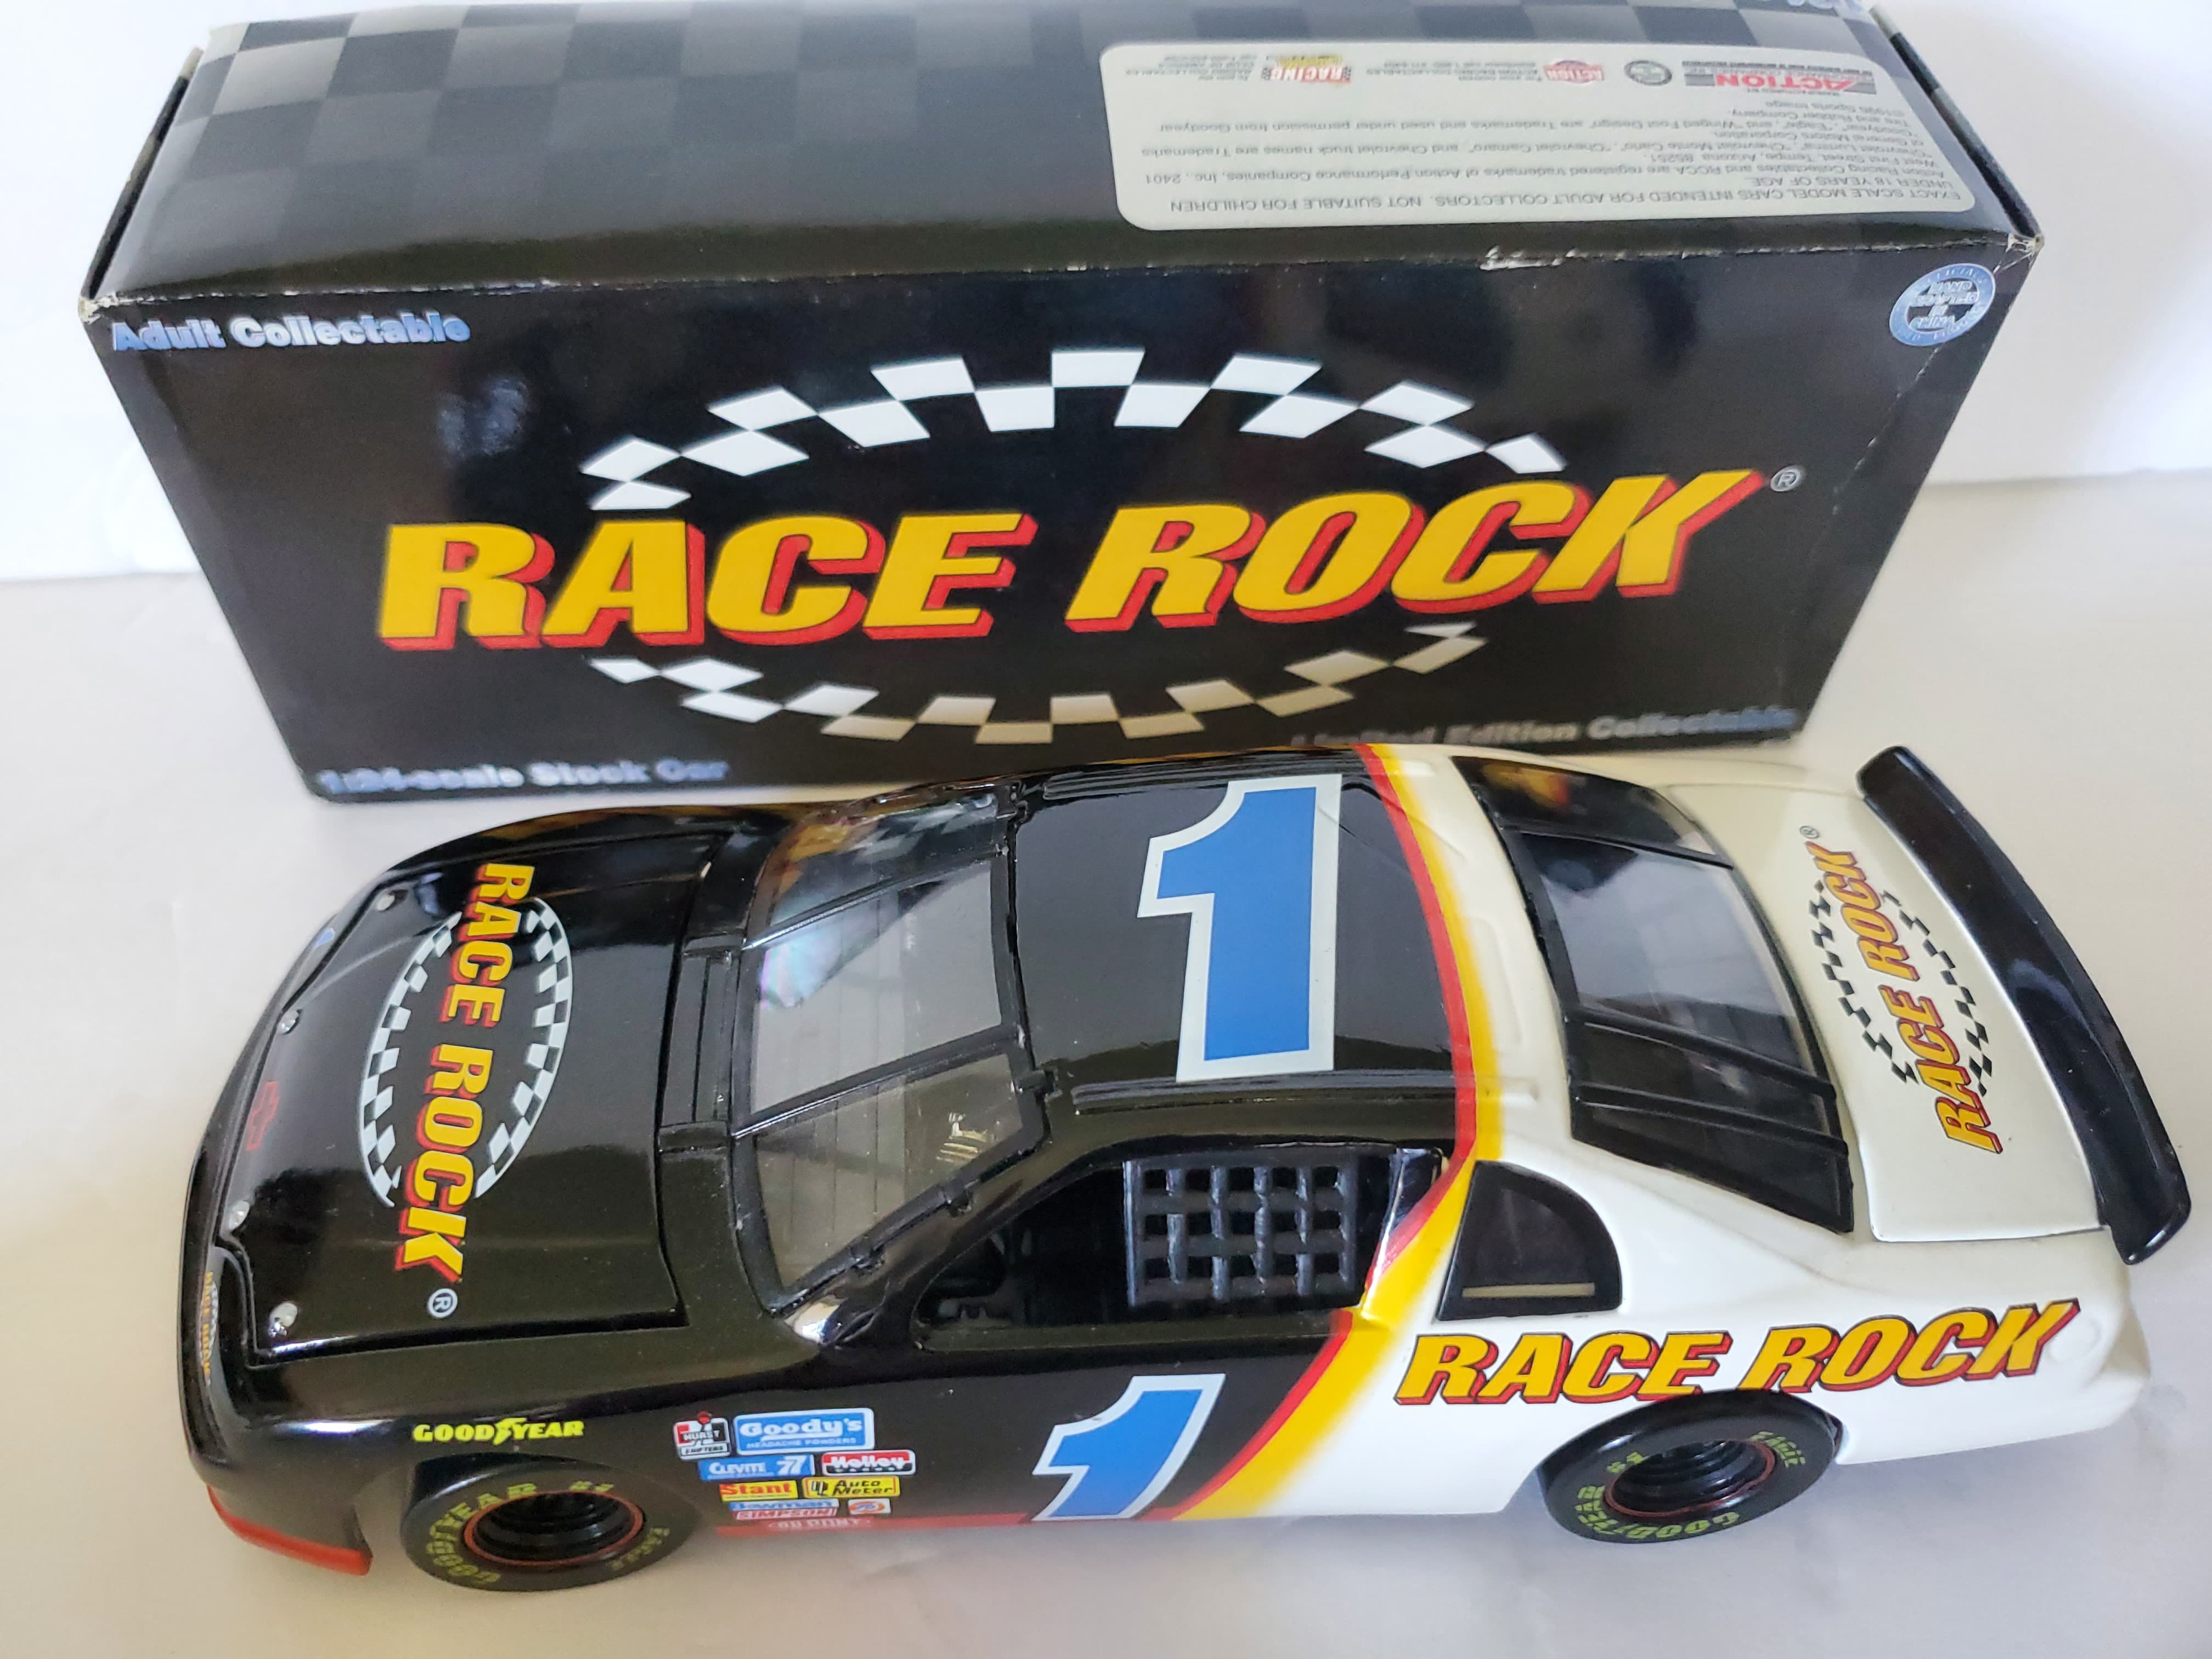 1996 RACE ROCK #1 STOCK CAR - 1/24 SCALE - Second hand - SH034